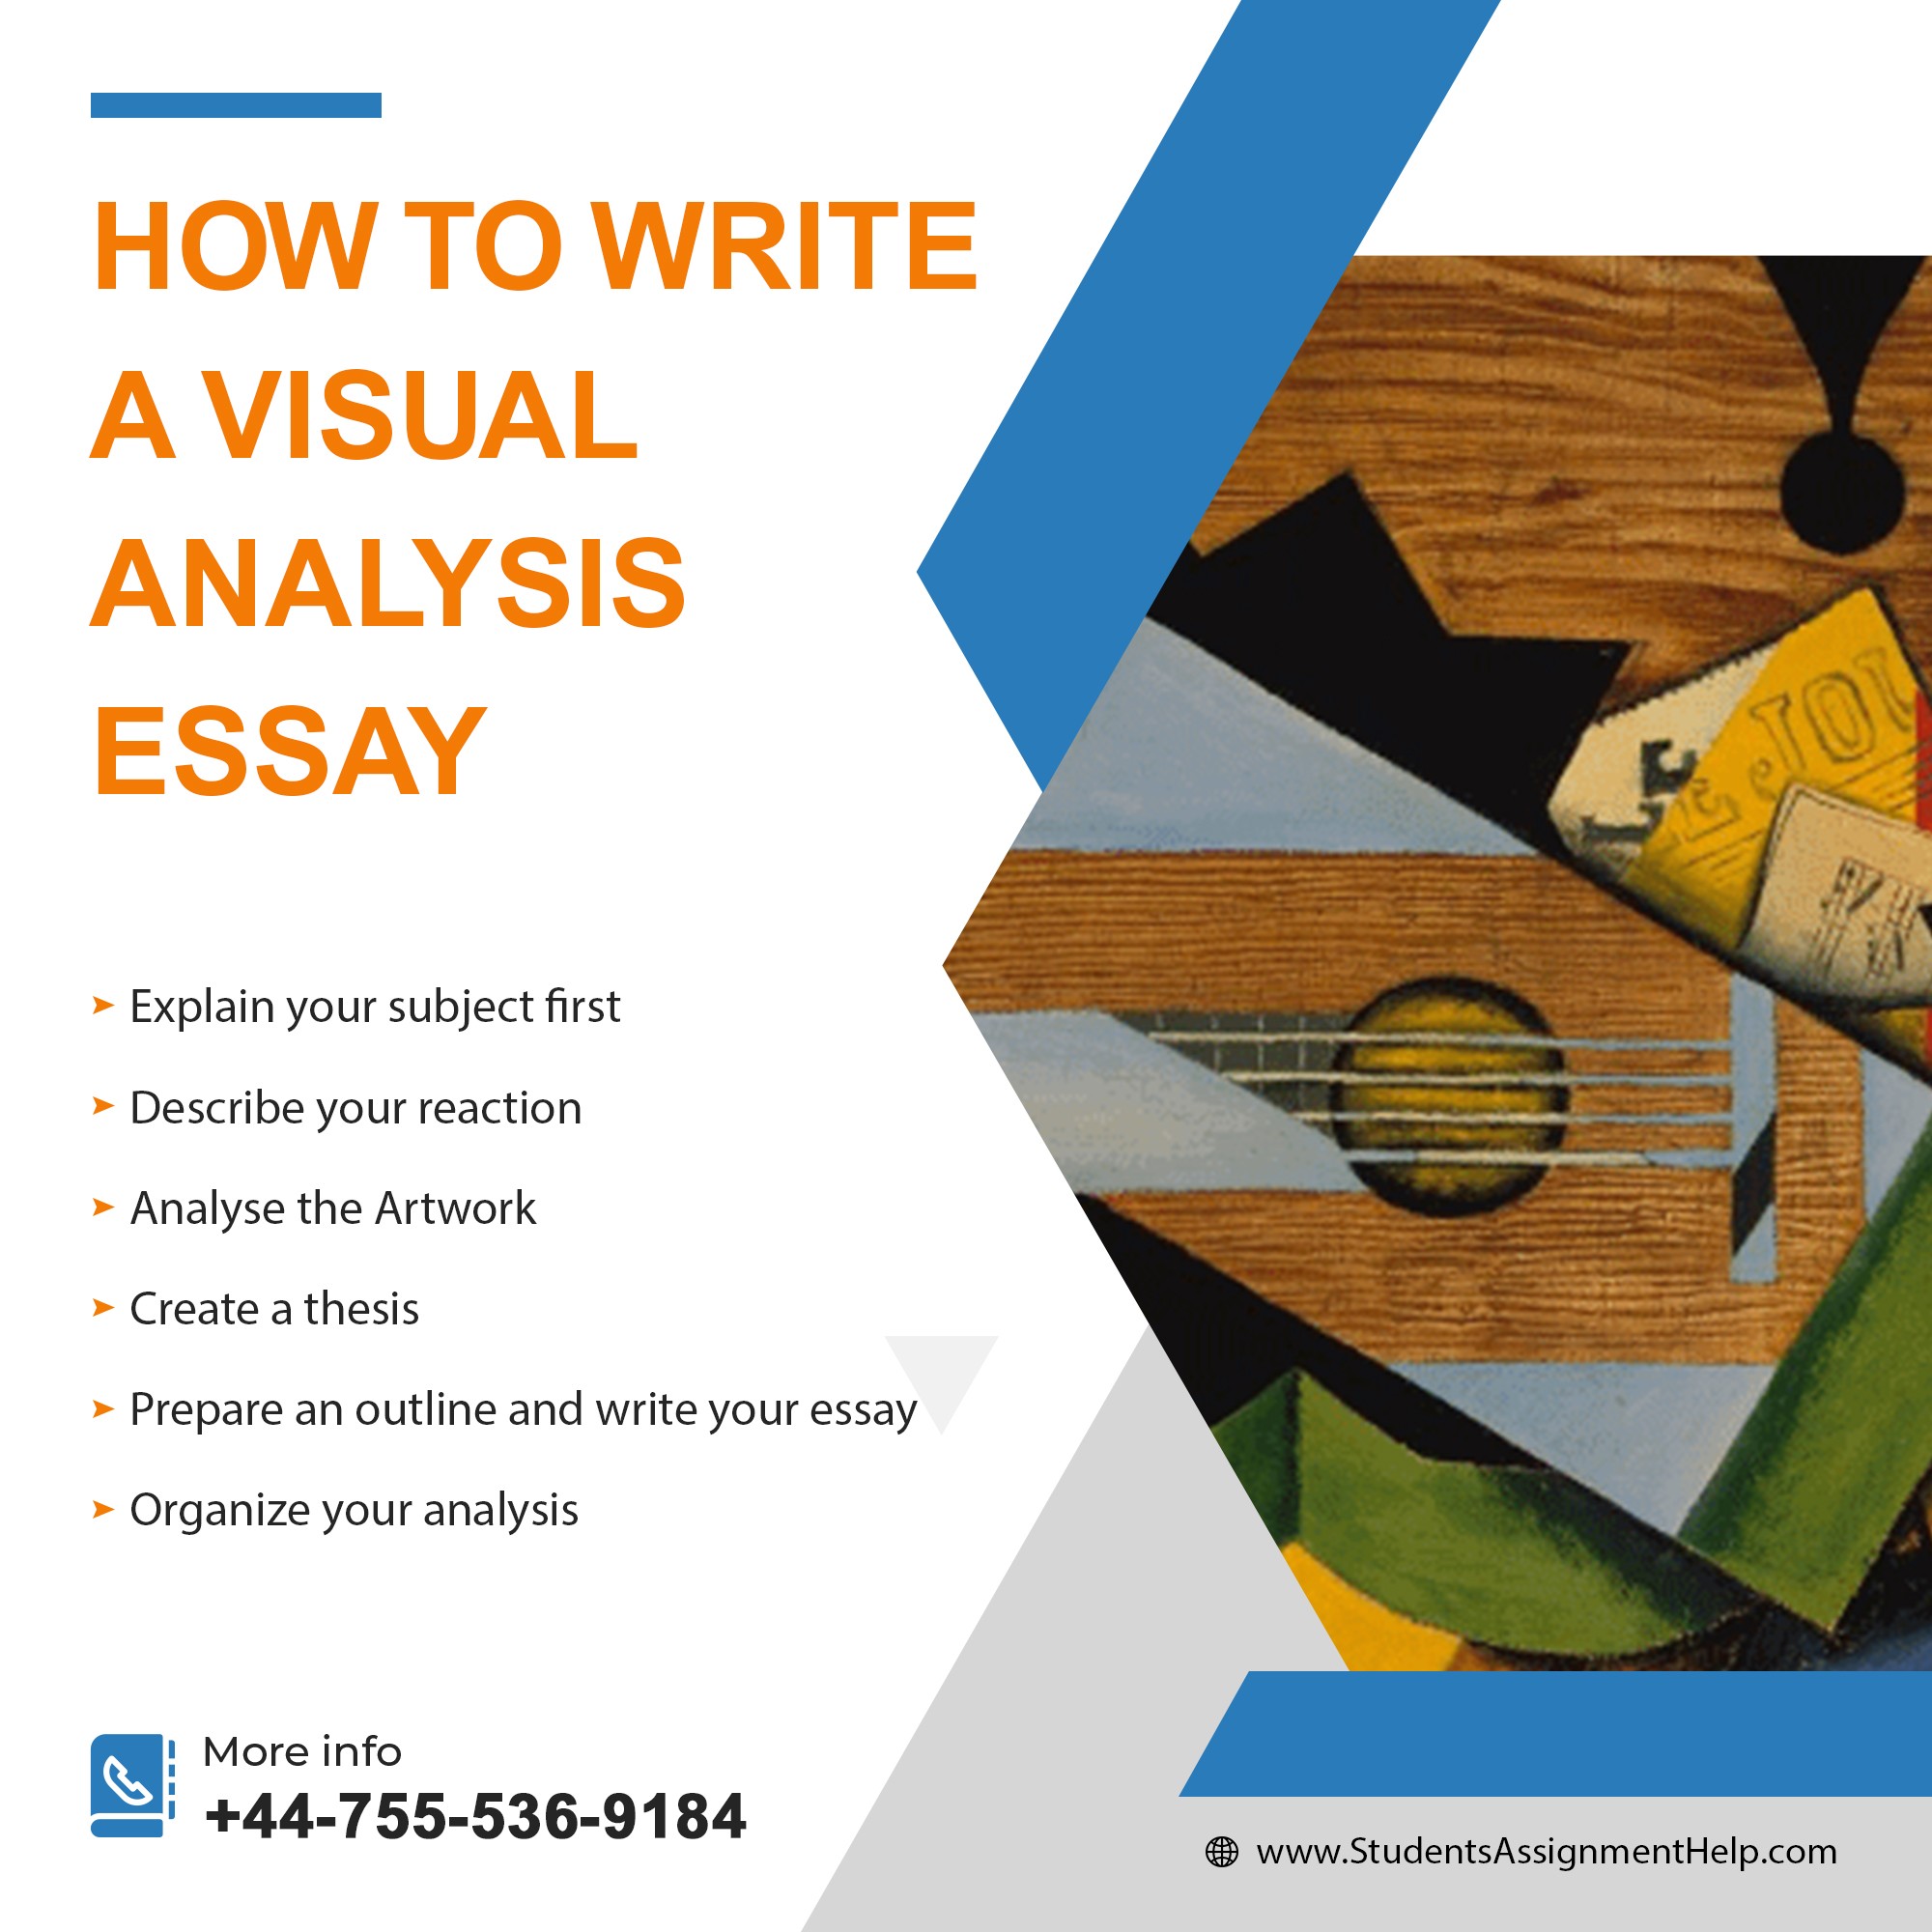 write an essay on visual effects